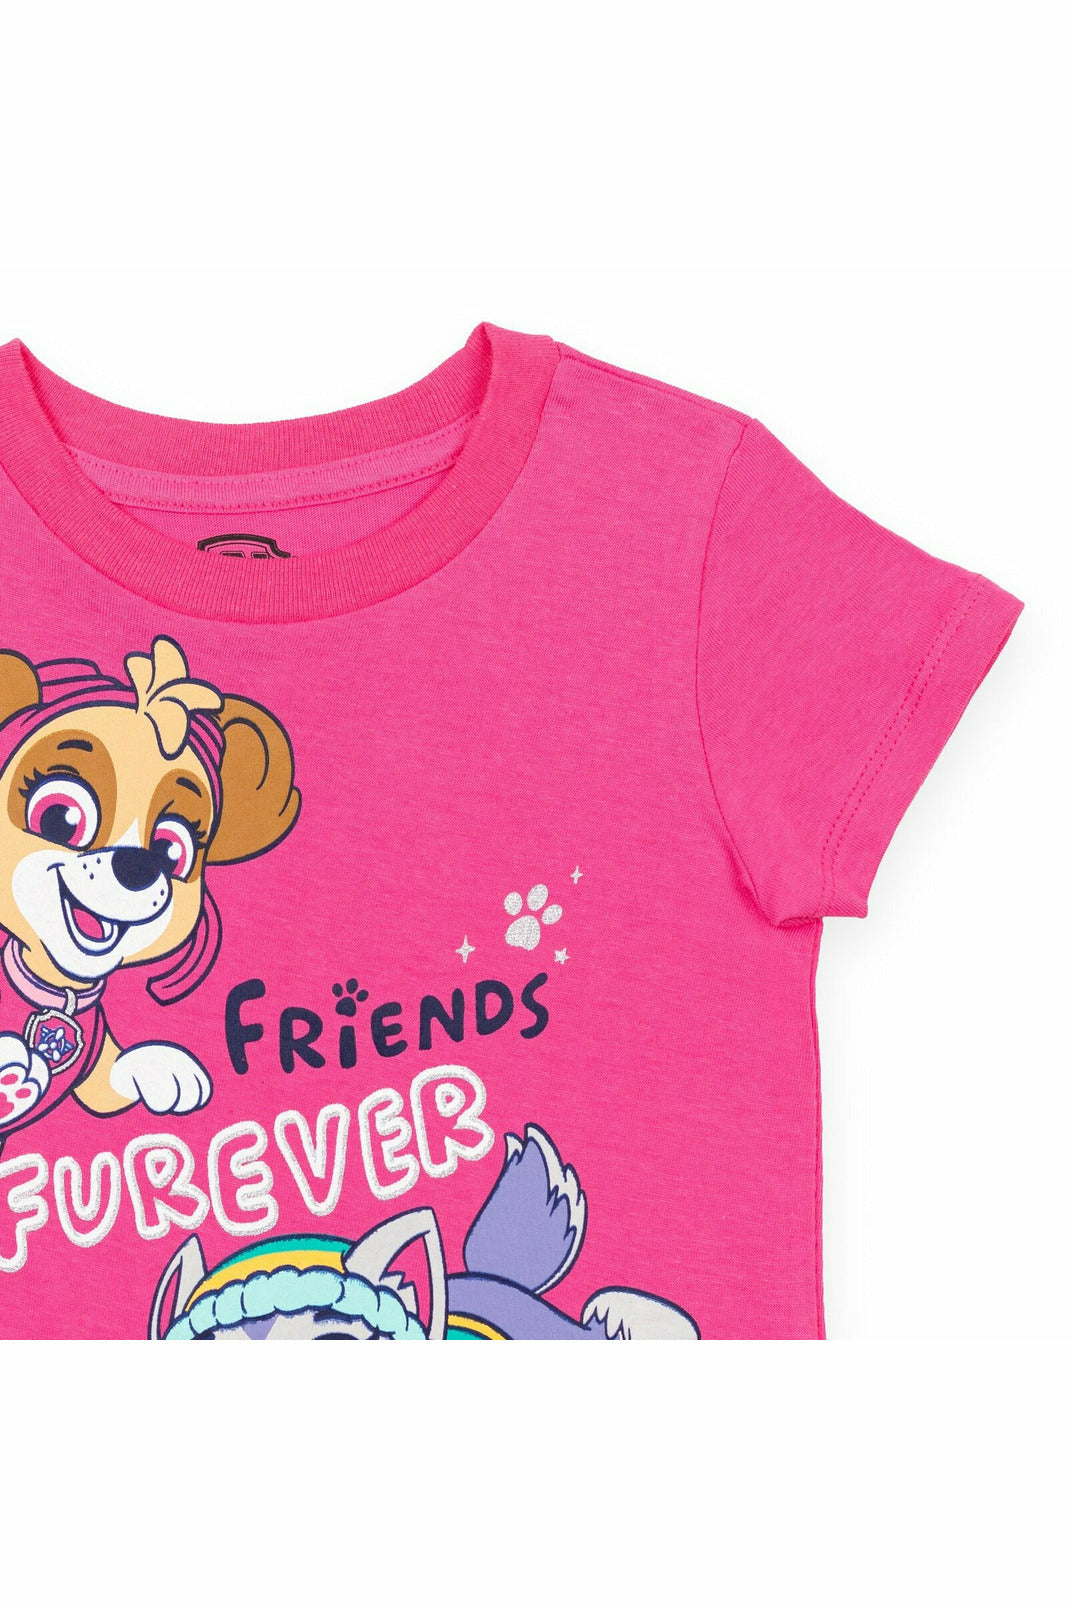 Paw Patrol 2 Pack Graphic T-Shirts